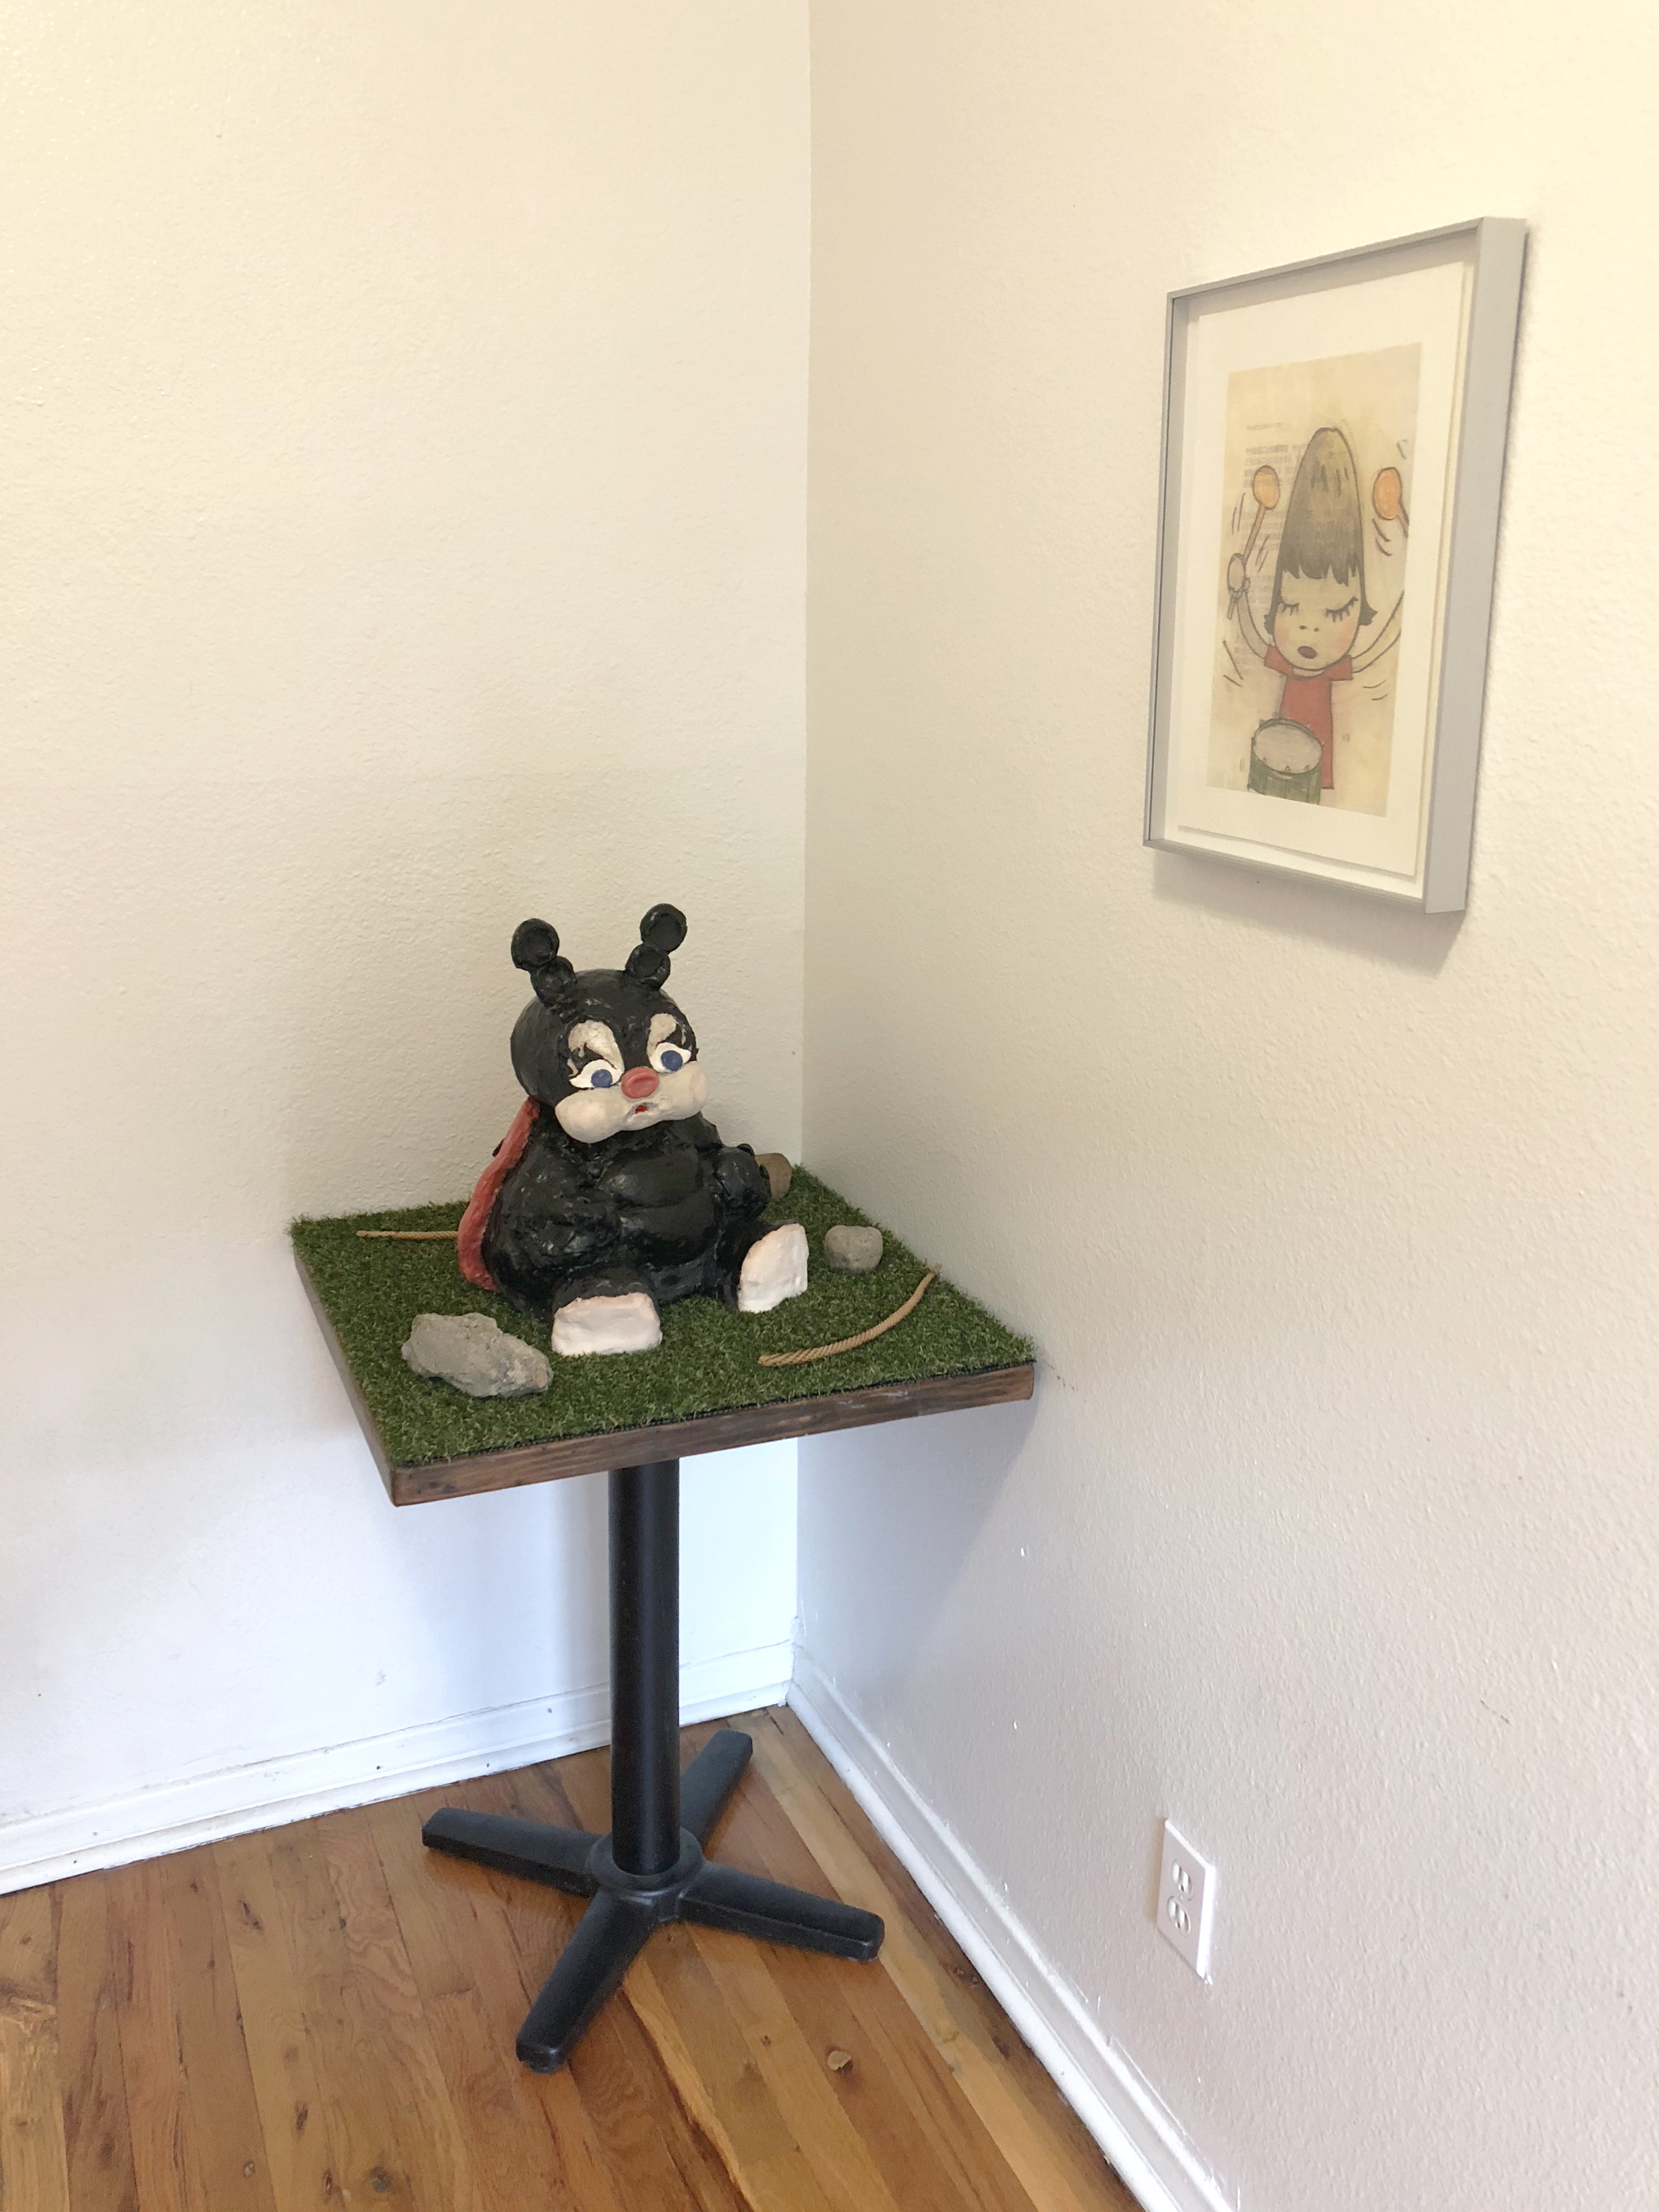 A ceramic sculpture of a black ladybugy on a small table covered in astroturf with a drawing hung on the wall beside it